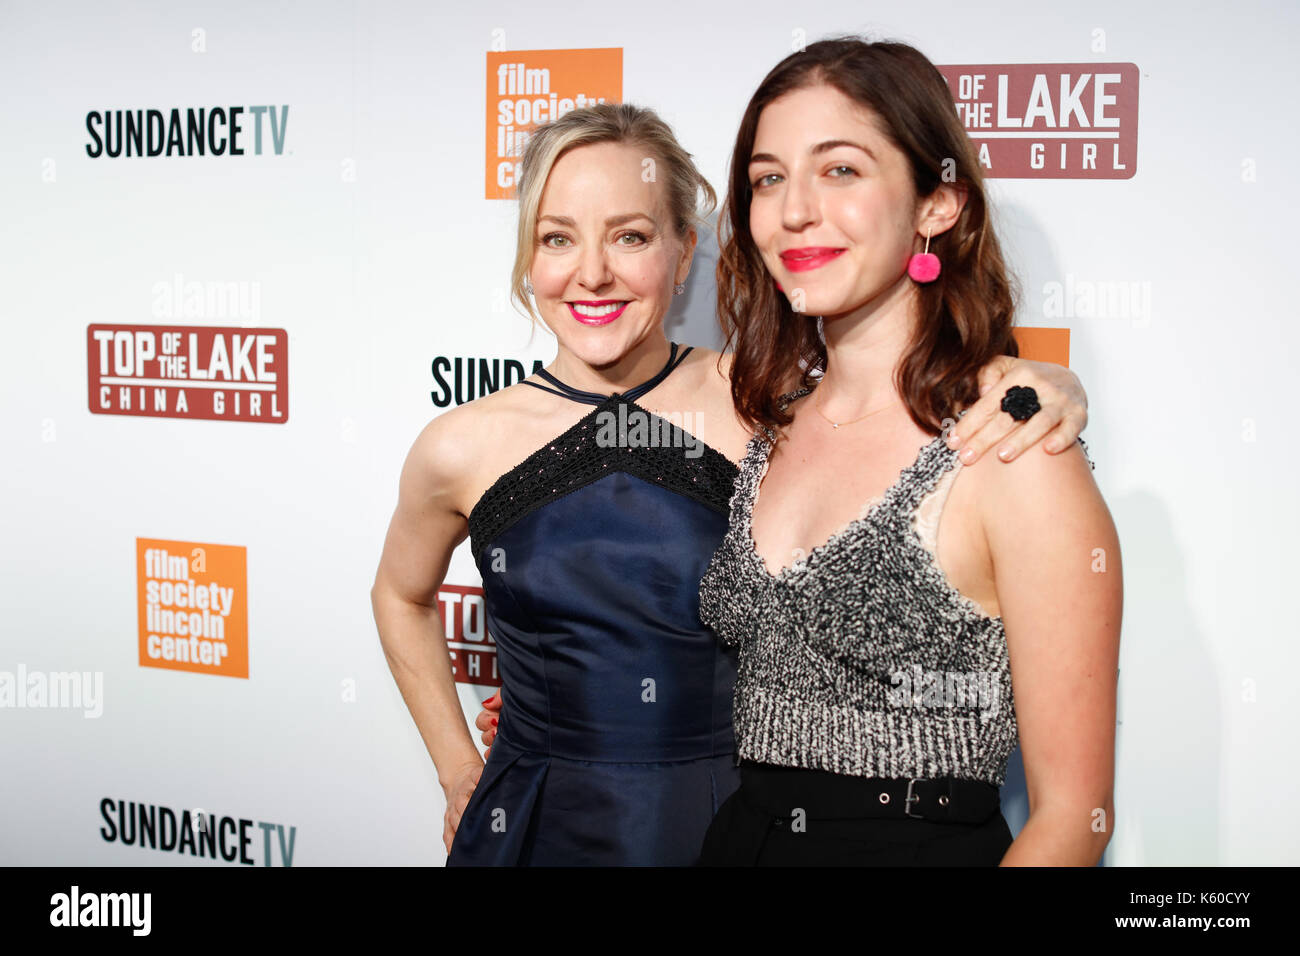 Geneva Carr Annabelle Attanasio arrives premiere Top Lake : China Girl Film Society Lincoln Center's Walter Reade Theater NYC. Stock Photo